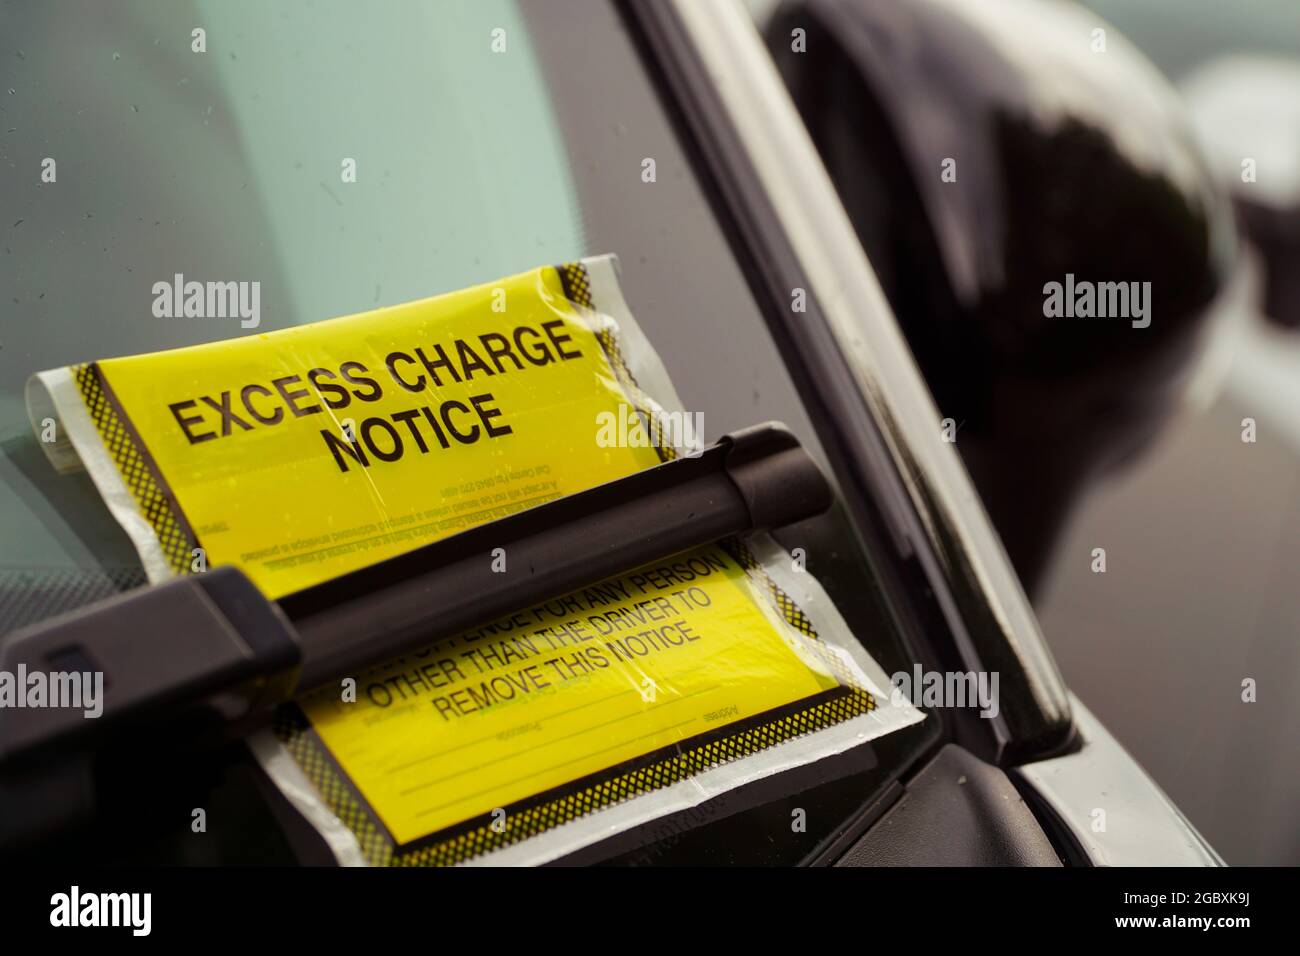 London, UK, 5 August 2021: A parking penalty notice on a car in London. While more people have spurned public transport since the coronavirus pandemic began, local councils are keen to avoid congestion and parking restrictions are one way of discouraging motorists. Anna Watson/Alamy Stock Photo